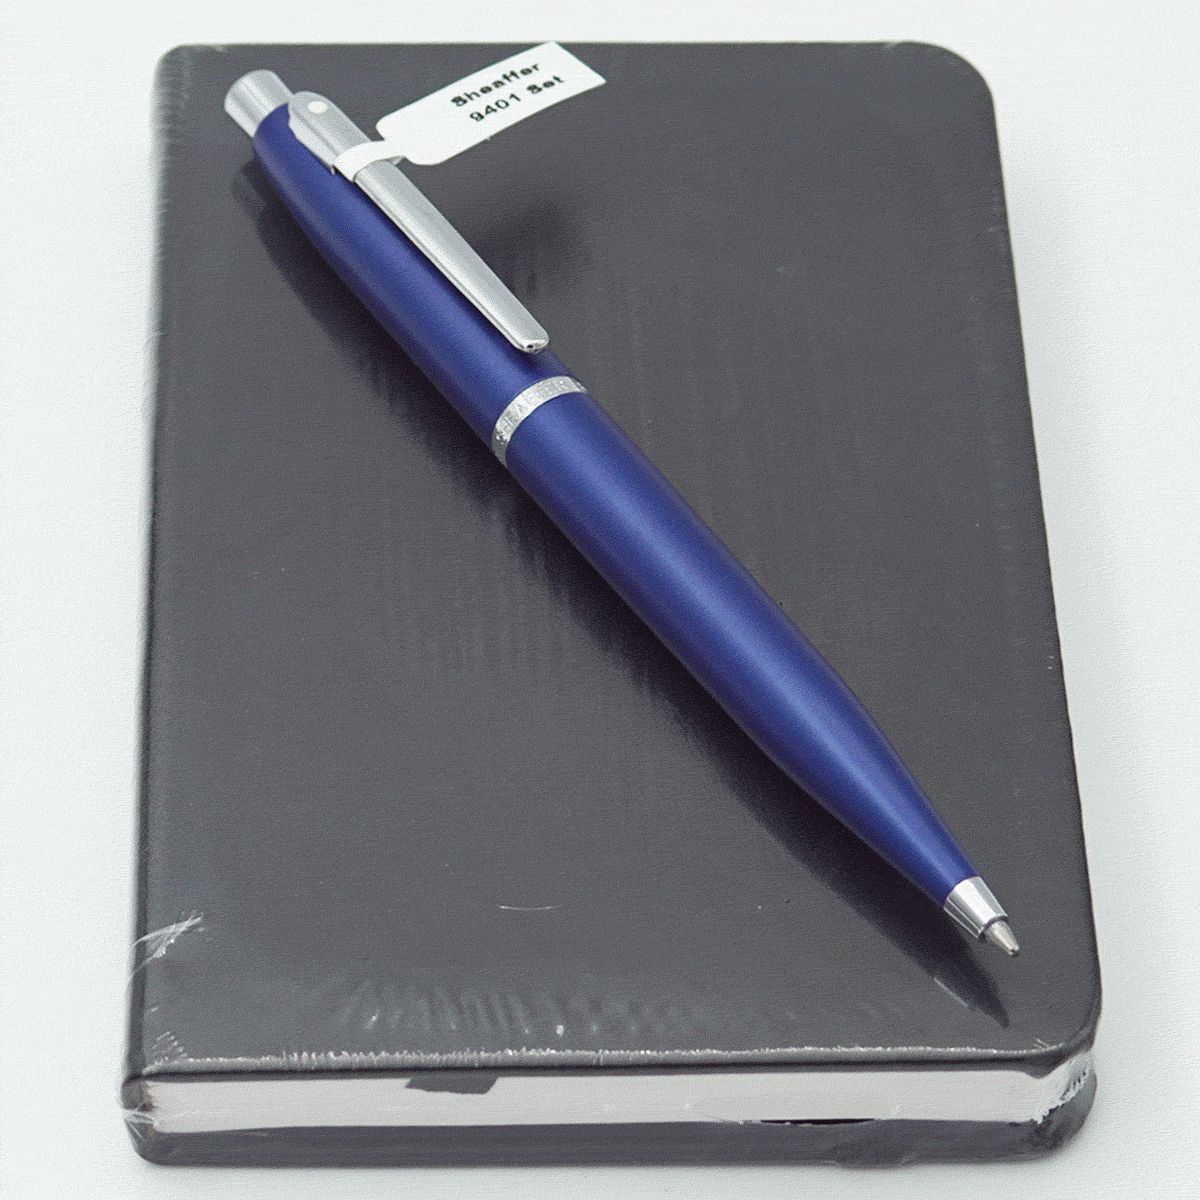 Sheaffer 9401 Blue Color Body With Cap And Silver Clip Medium Tip Retractable Type Ball Pen With Small Note Book Set SKU 24179